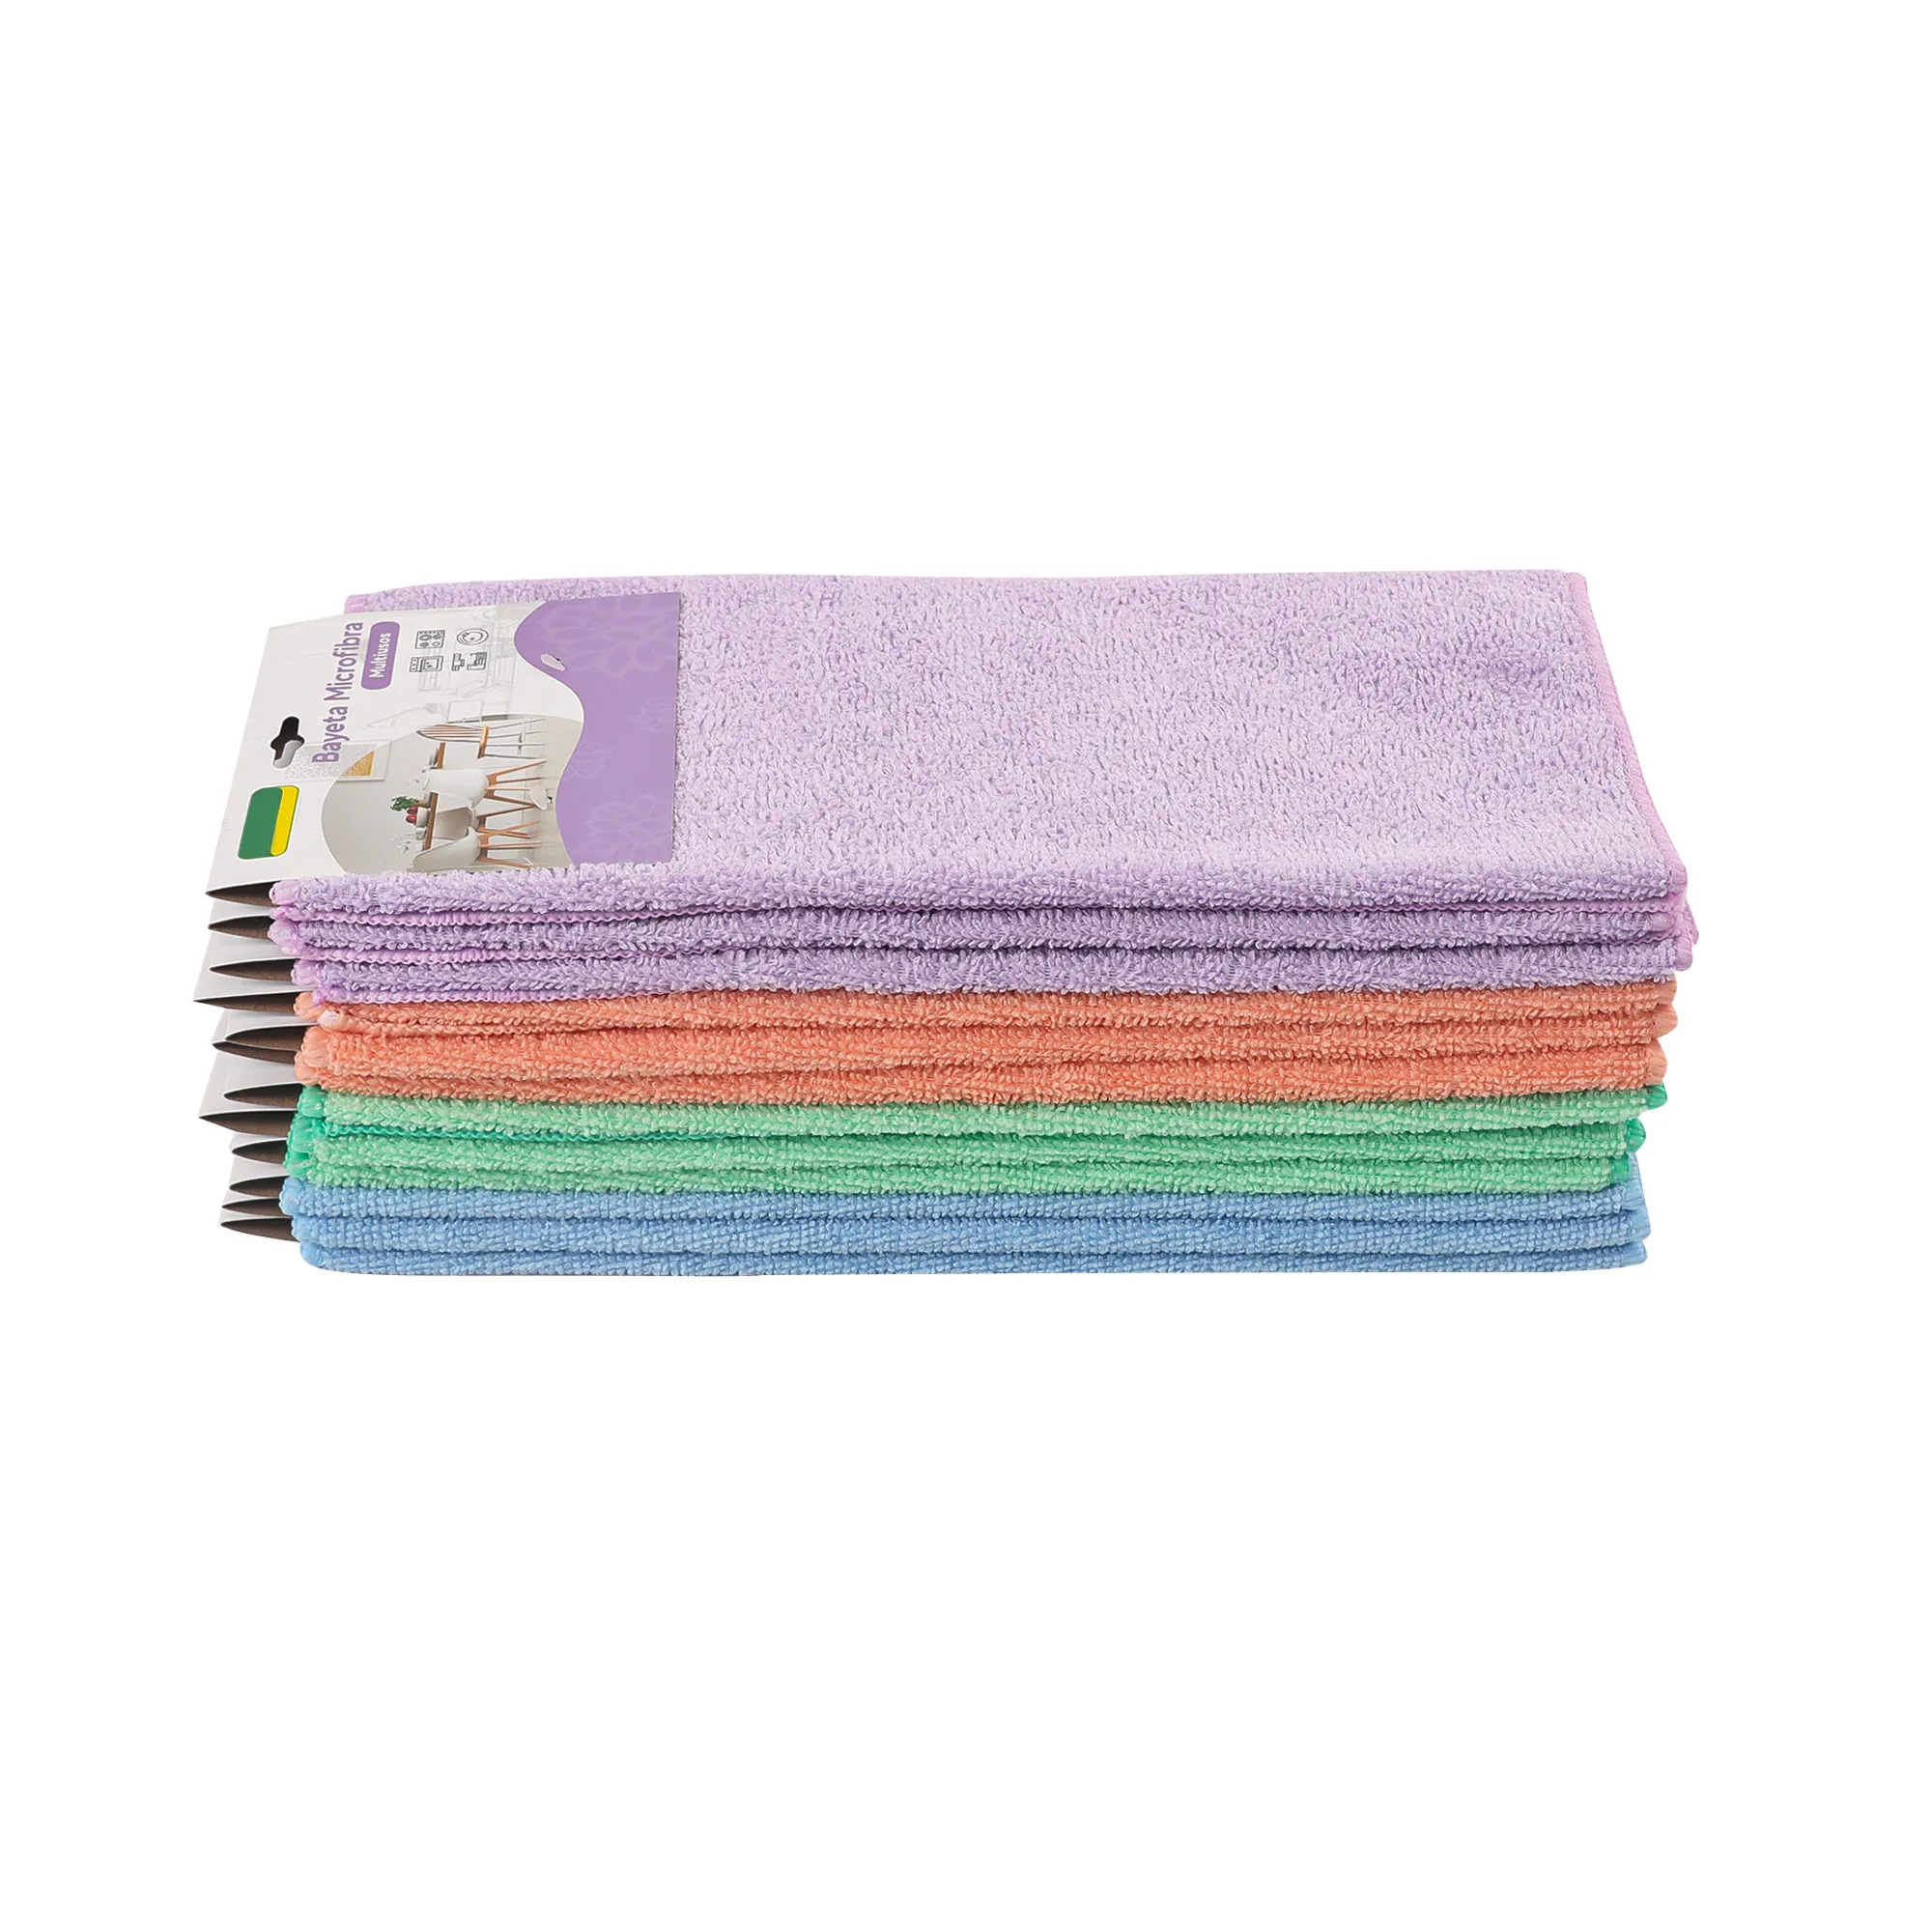 Microfiber Kitchen Common Dish Cloth Towel Making Fabric Waffle Terry Cotton Tea Towel For Cleaning Cloth With Logo